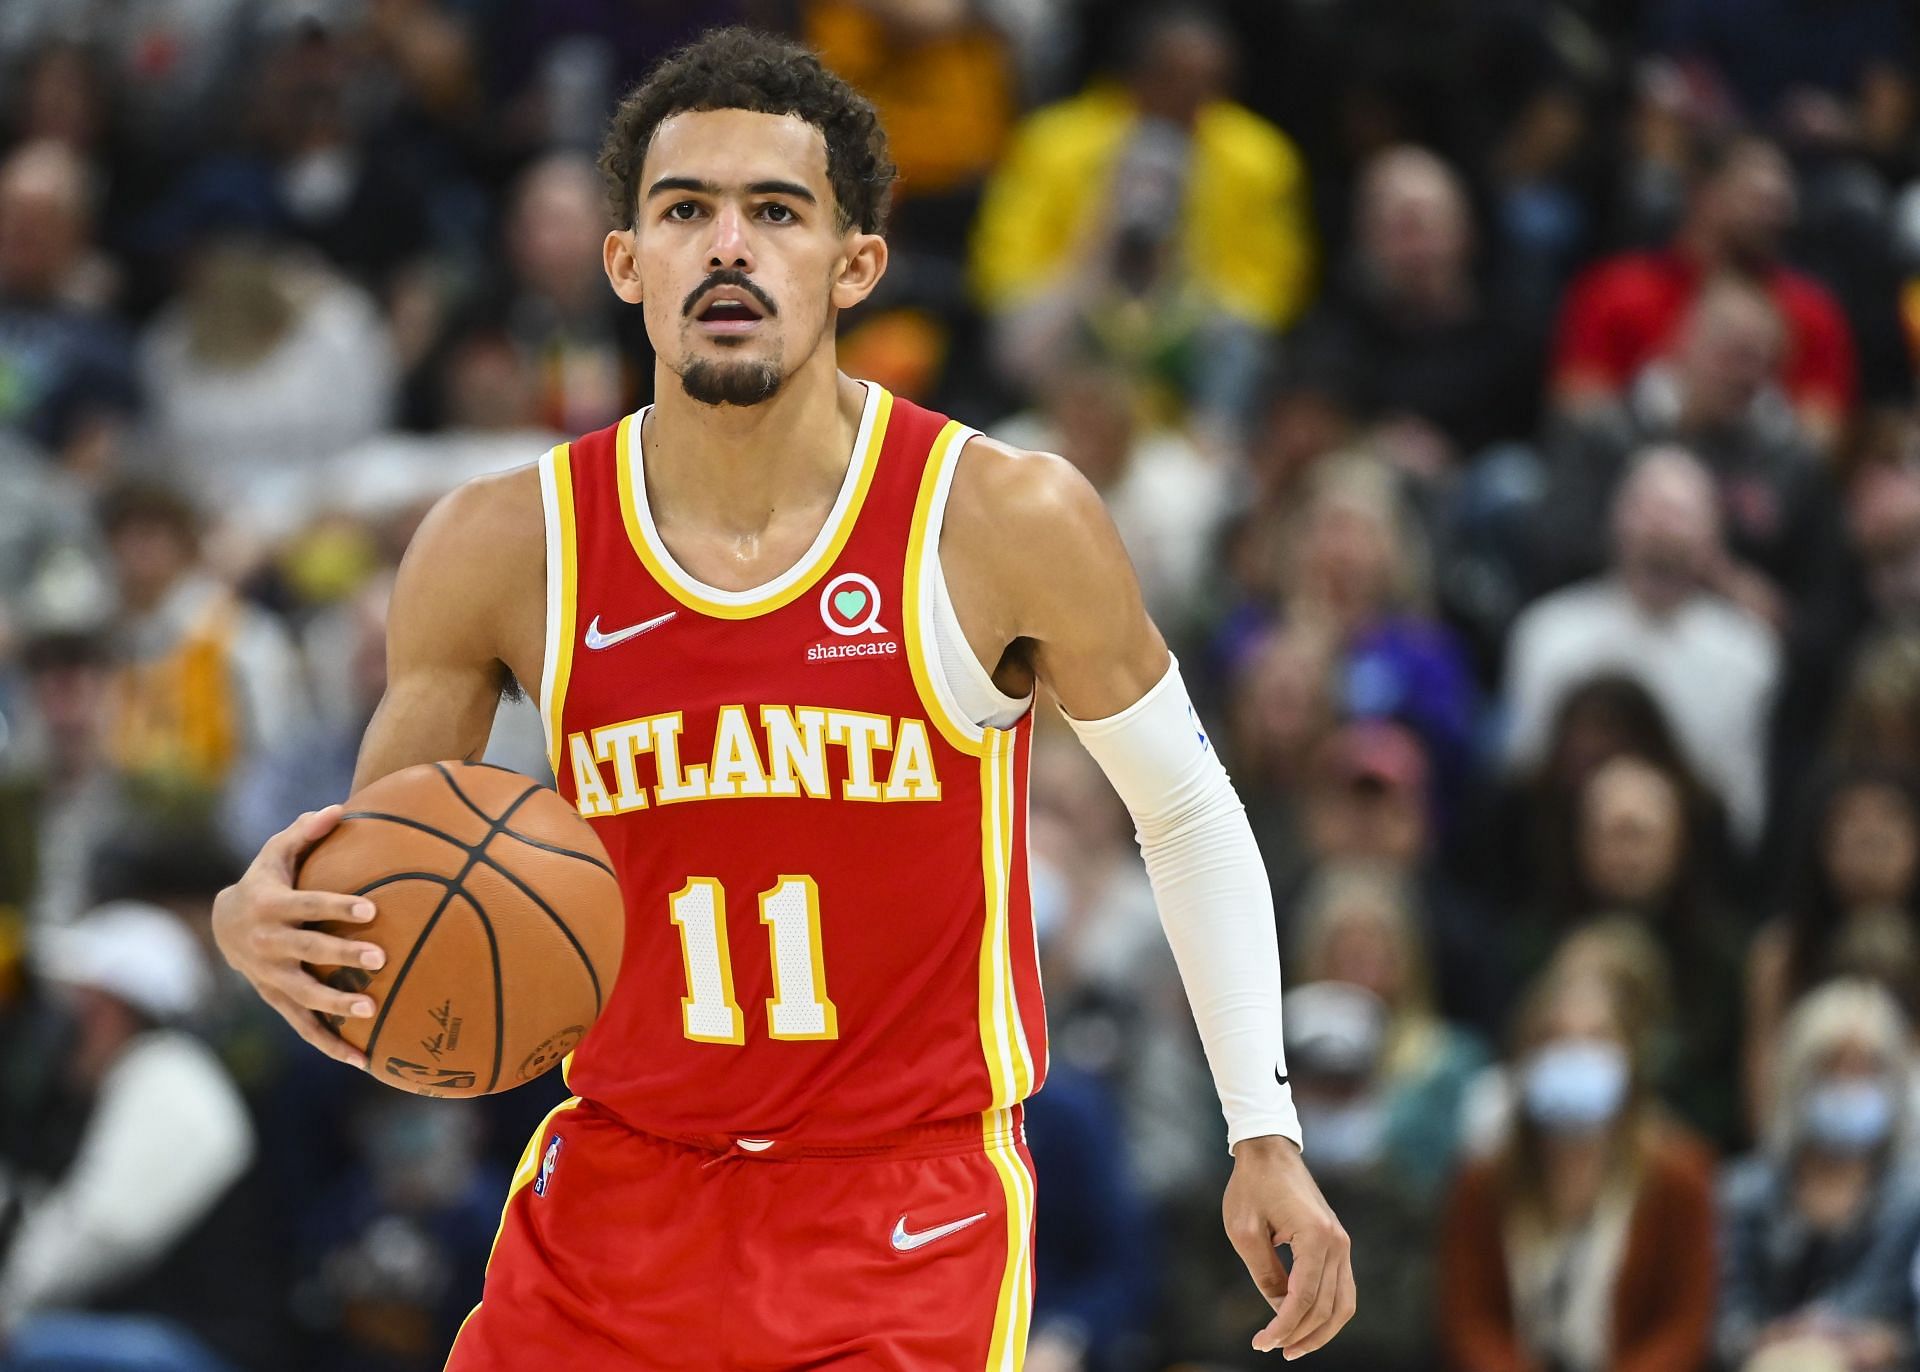 Trae Young looks to make a play for the Atlanta Hawks.